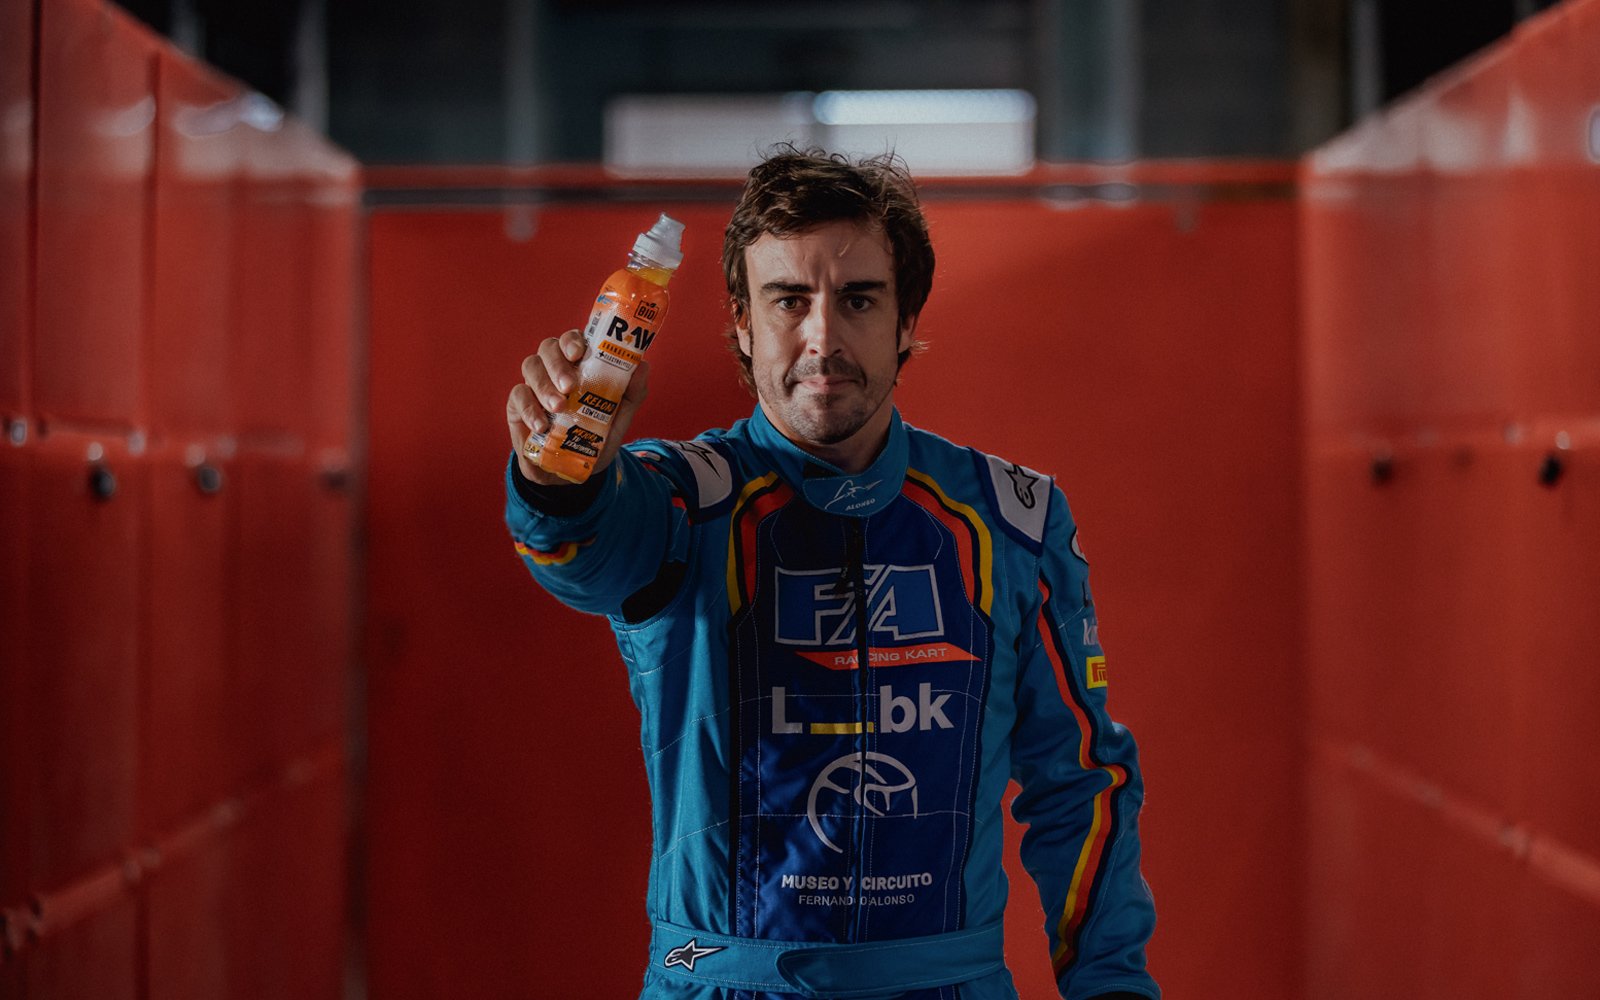 Alonso during marketing campaign of Raw SportsDrink